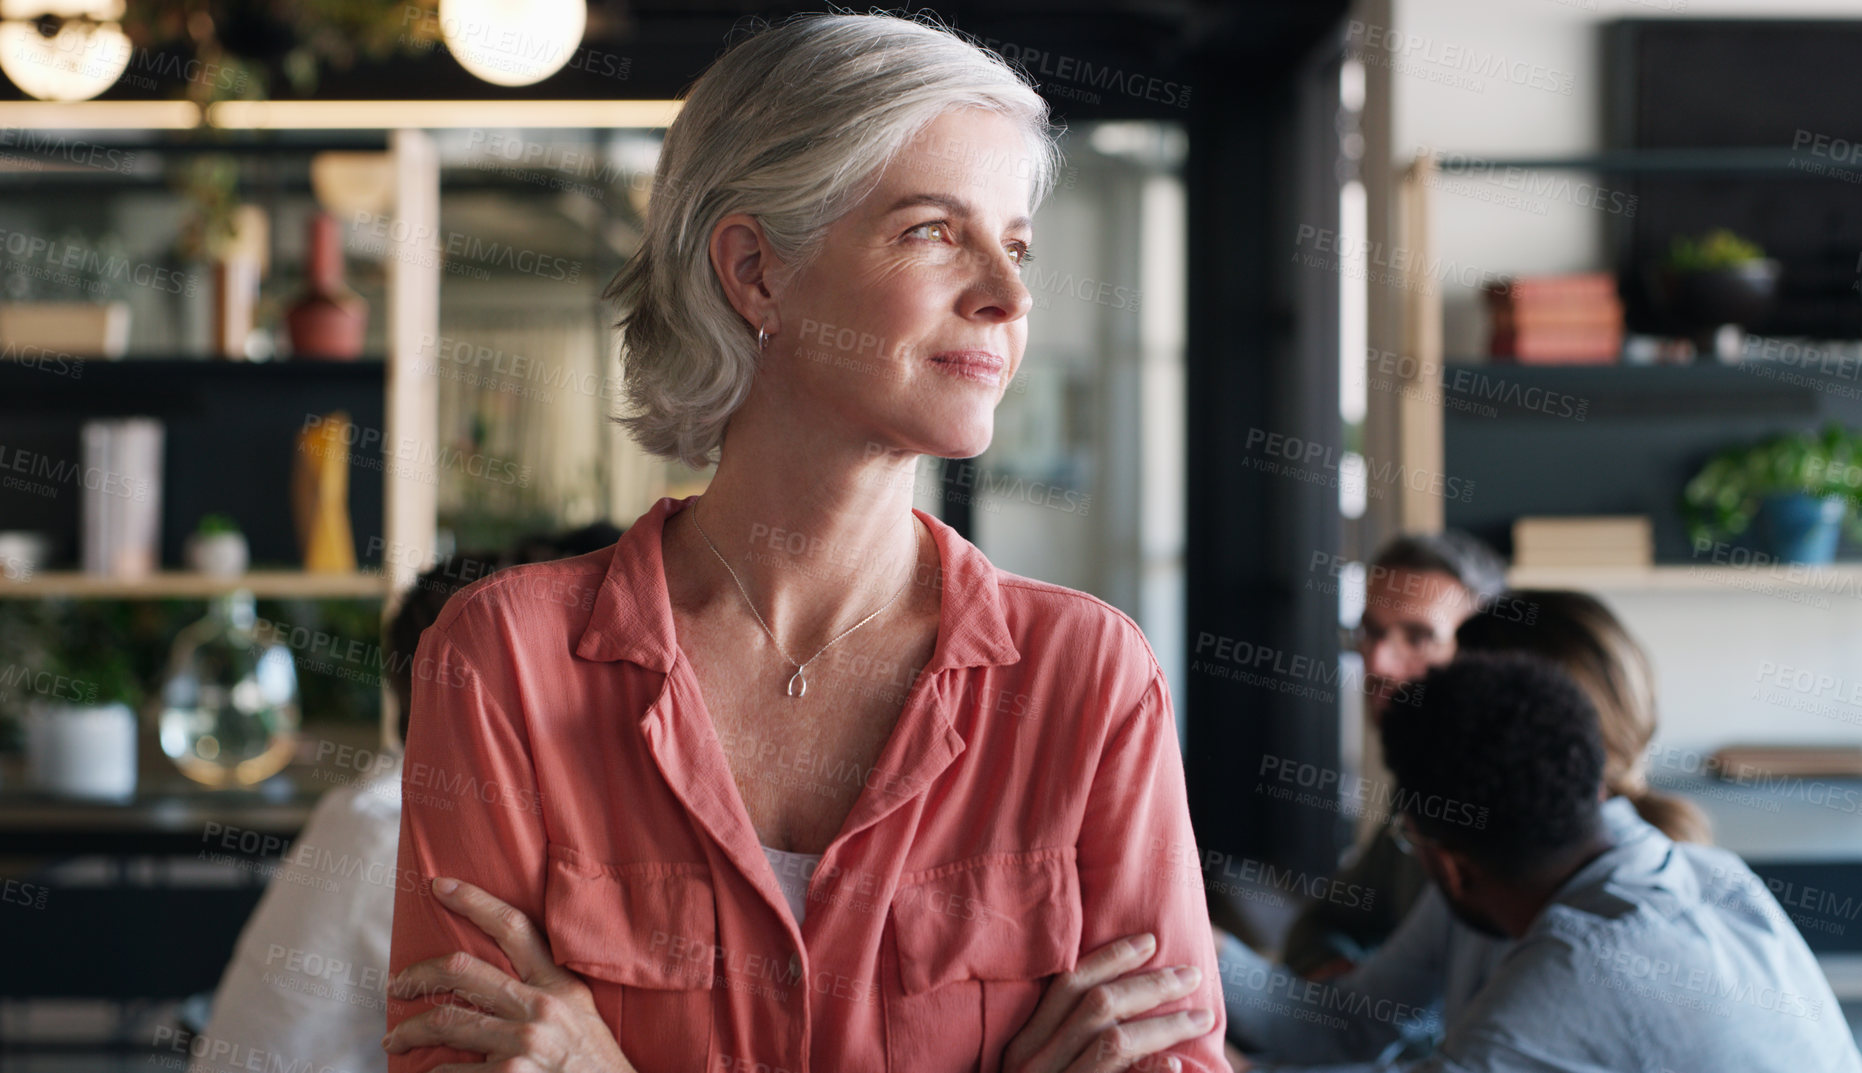 Buy stock photo Shot of a confident mature businesswoman in in the office boardroom with her colleagues in the background